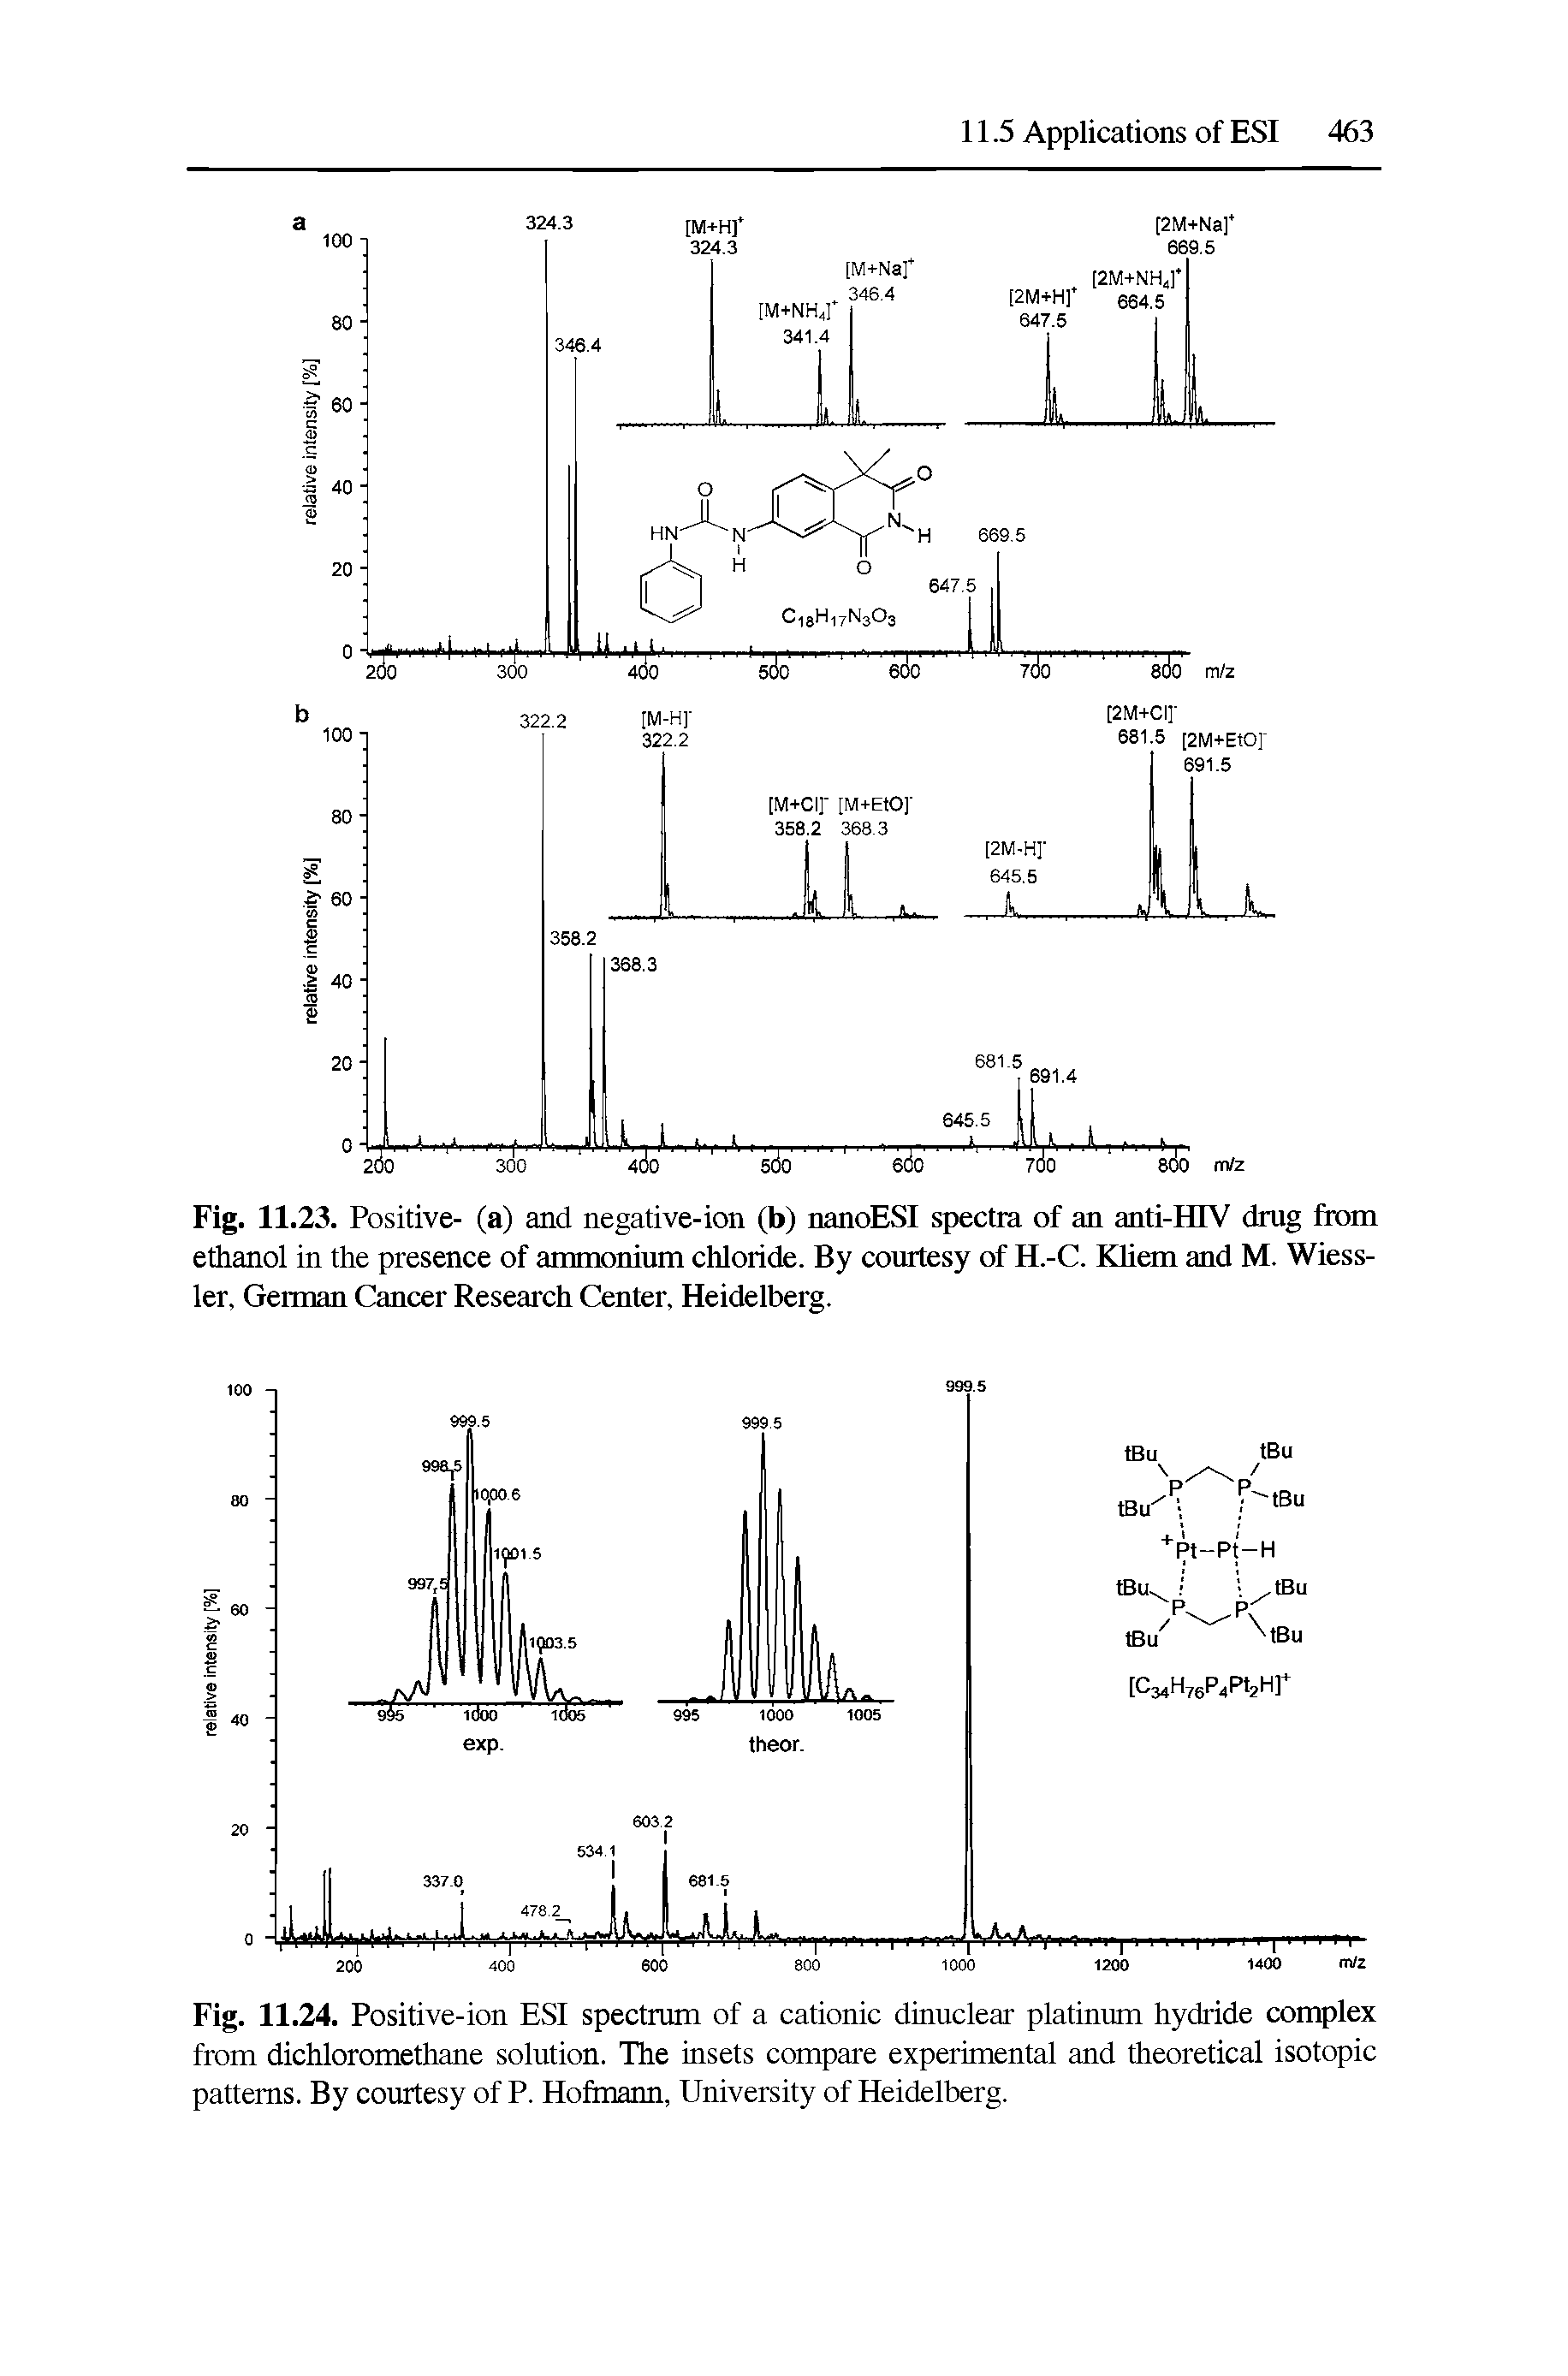 Fig. 11.24. Positive-ion ESI spectrum of a cationic dinuclear platinum hydride complex from dichloromethane solution. The insets compare experimental and theoretical isotopic patterns. By courtesy of P. Hofmann, University of Heidelberg.